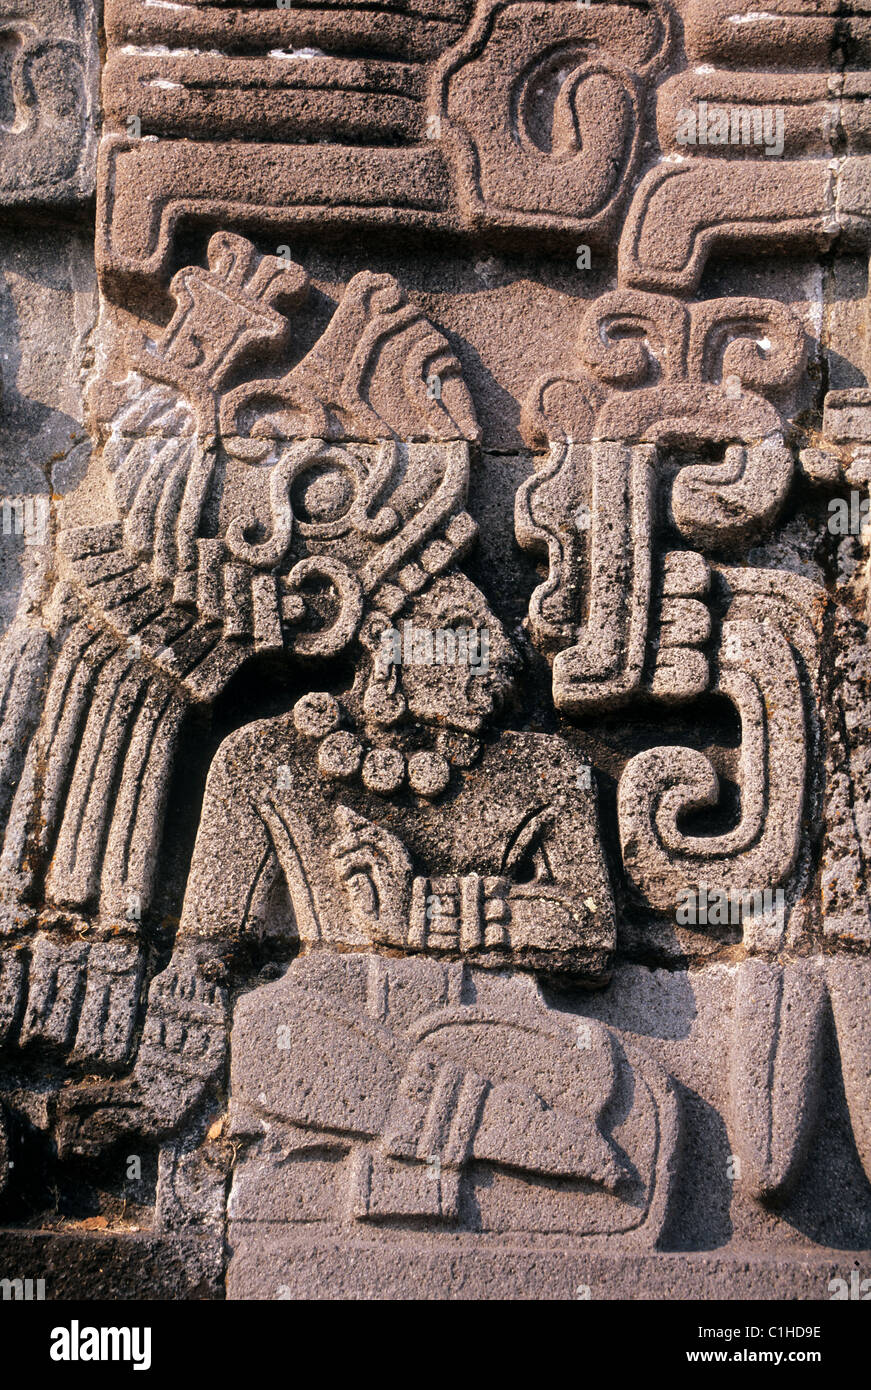 Mexico, Morelos State, Xochicalco site listed as World Heritage by UNESCO, Feathered Snake pyramid (Quetzalcoatl) Stock Photo